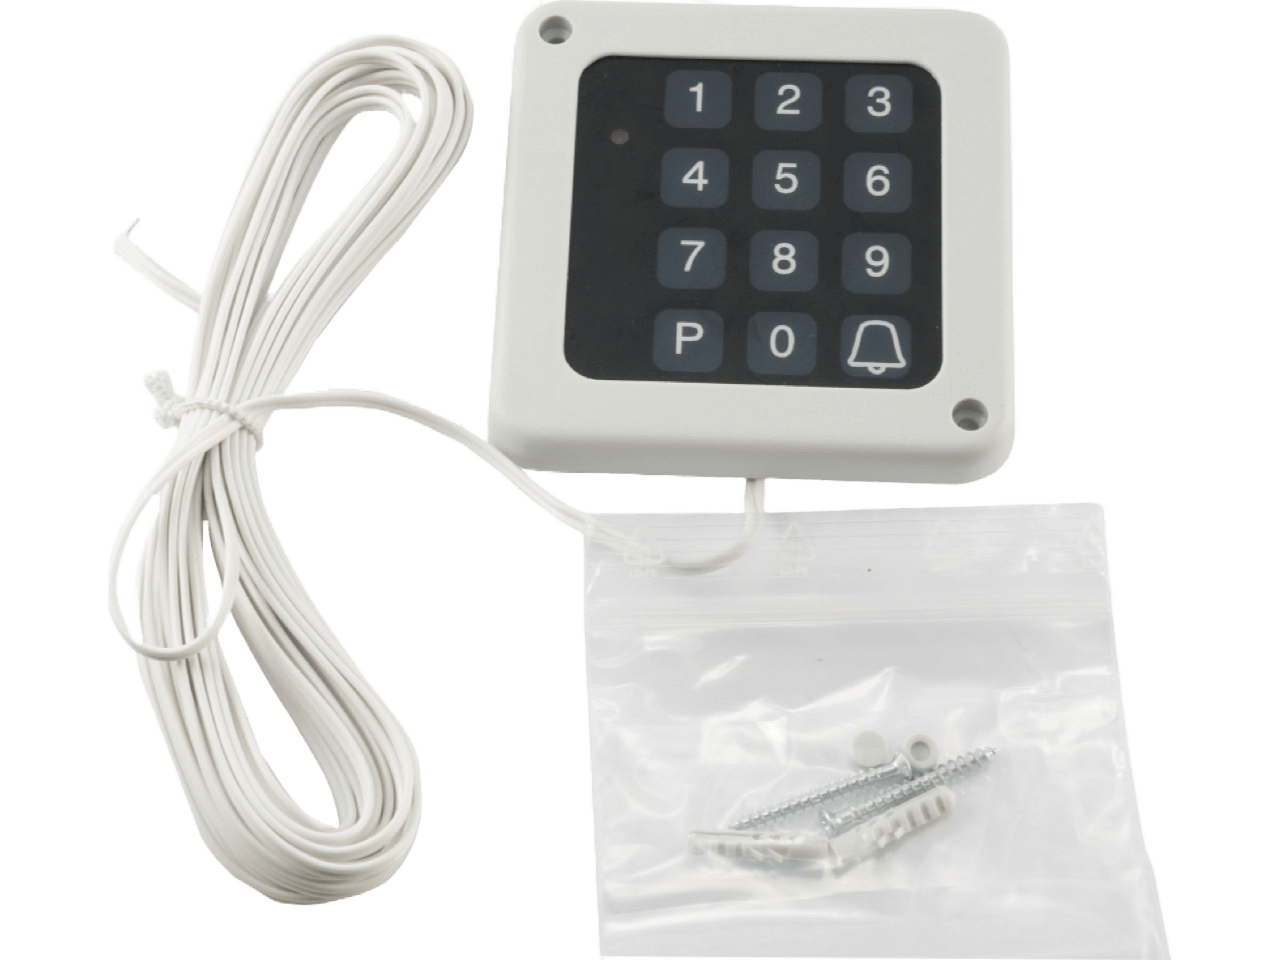 Orion OCL 1 AP and DCE 1 230V Code-Lock with Foil Keypad